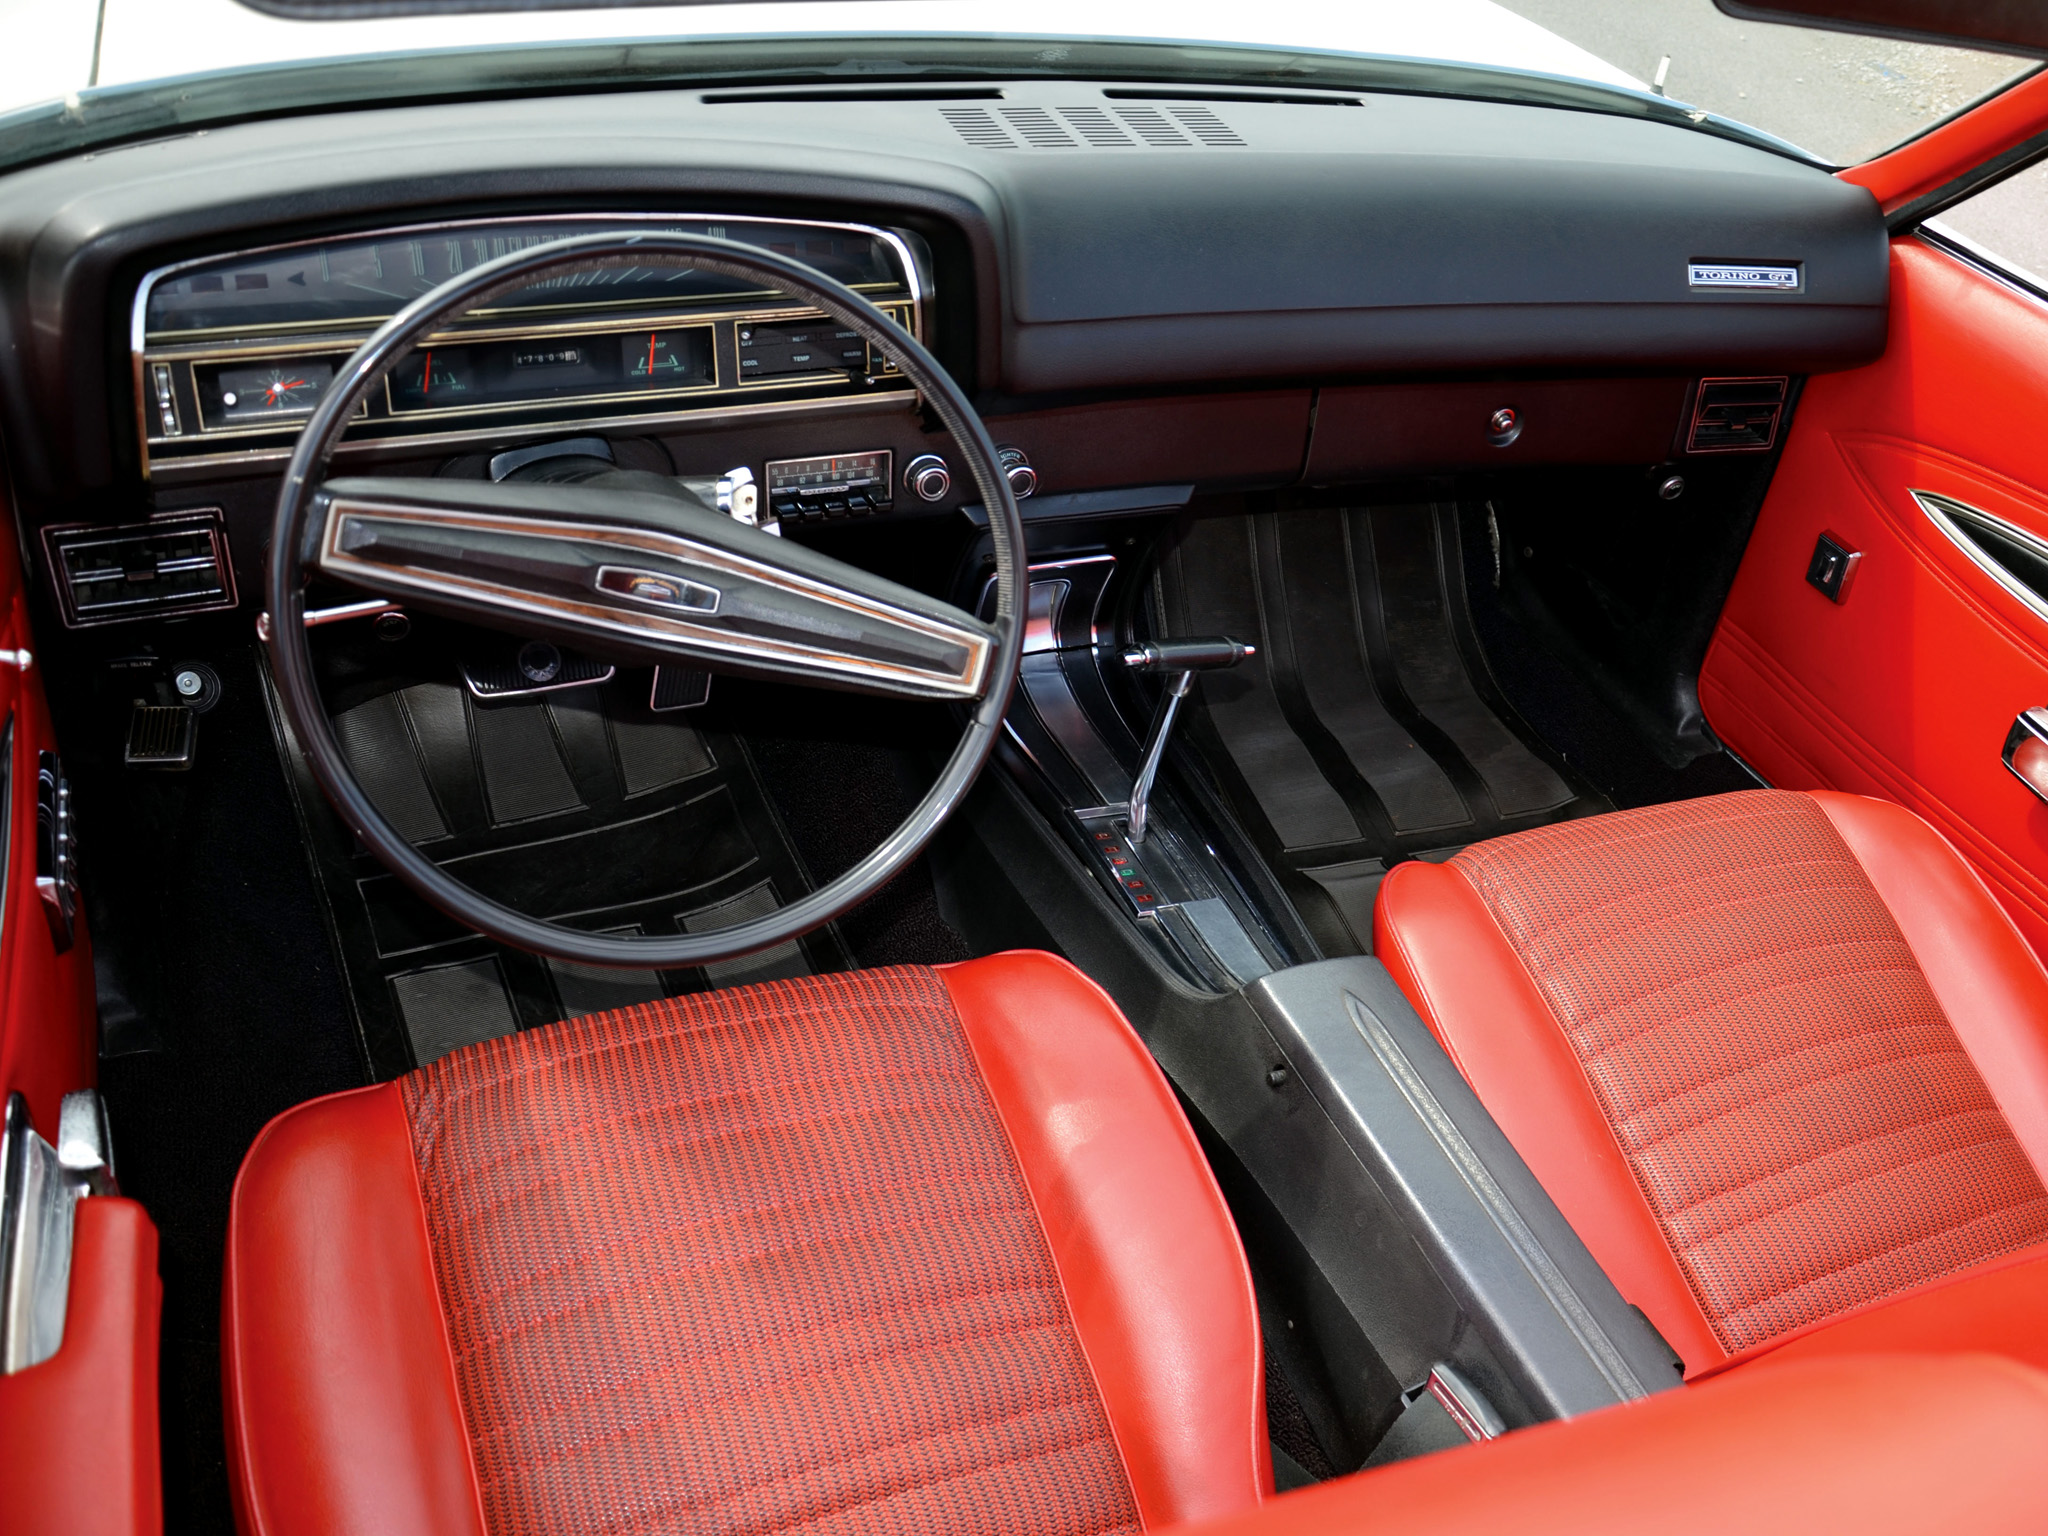 1971, 429, Ford, Torino, G t, Convertible, 76f, Classic, Muscle, Interior Wallpaper